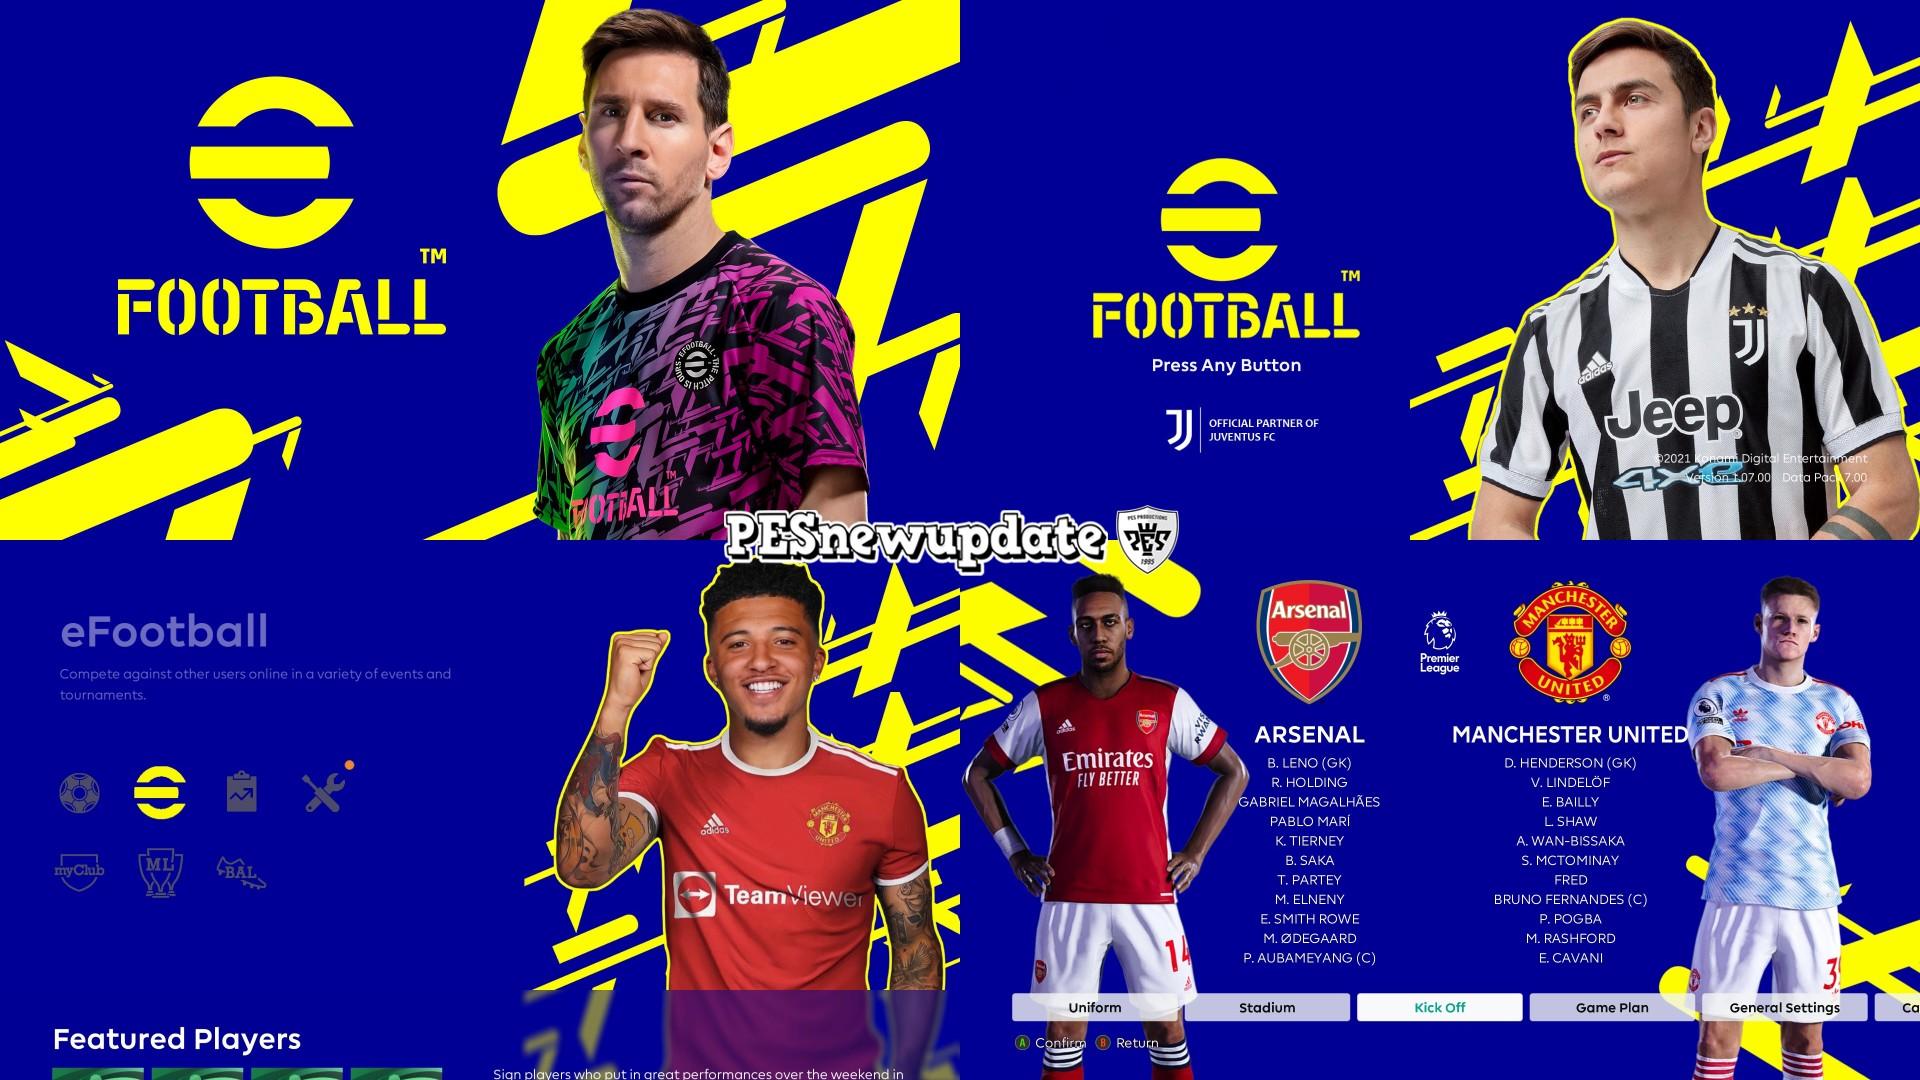 HUGO eFOOTBALL on X: #eFootball2023 all background cards and fonts download  links (no password required) Download Here👉  #eFootball2023 #eFootball2022 #efootball2023mobile #eFootballCards  #eFootballFonts #freetoplay